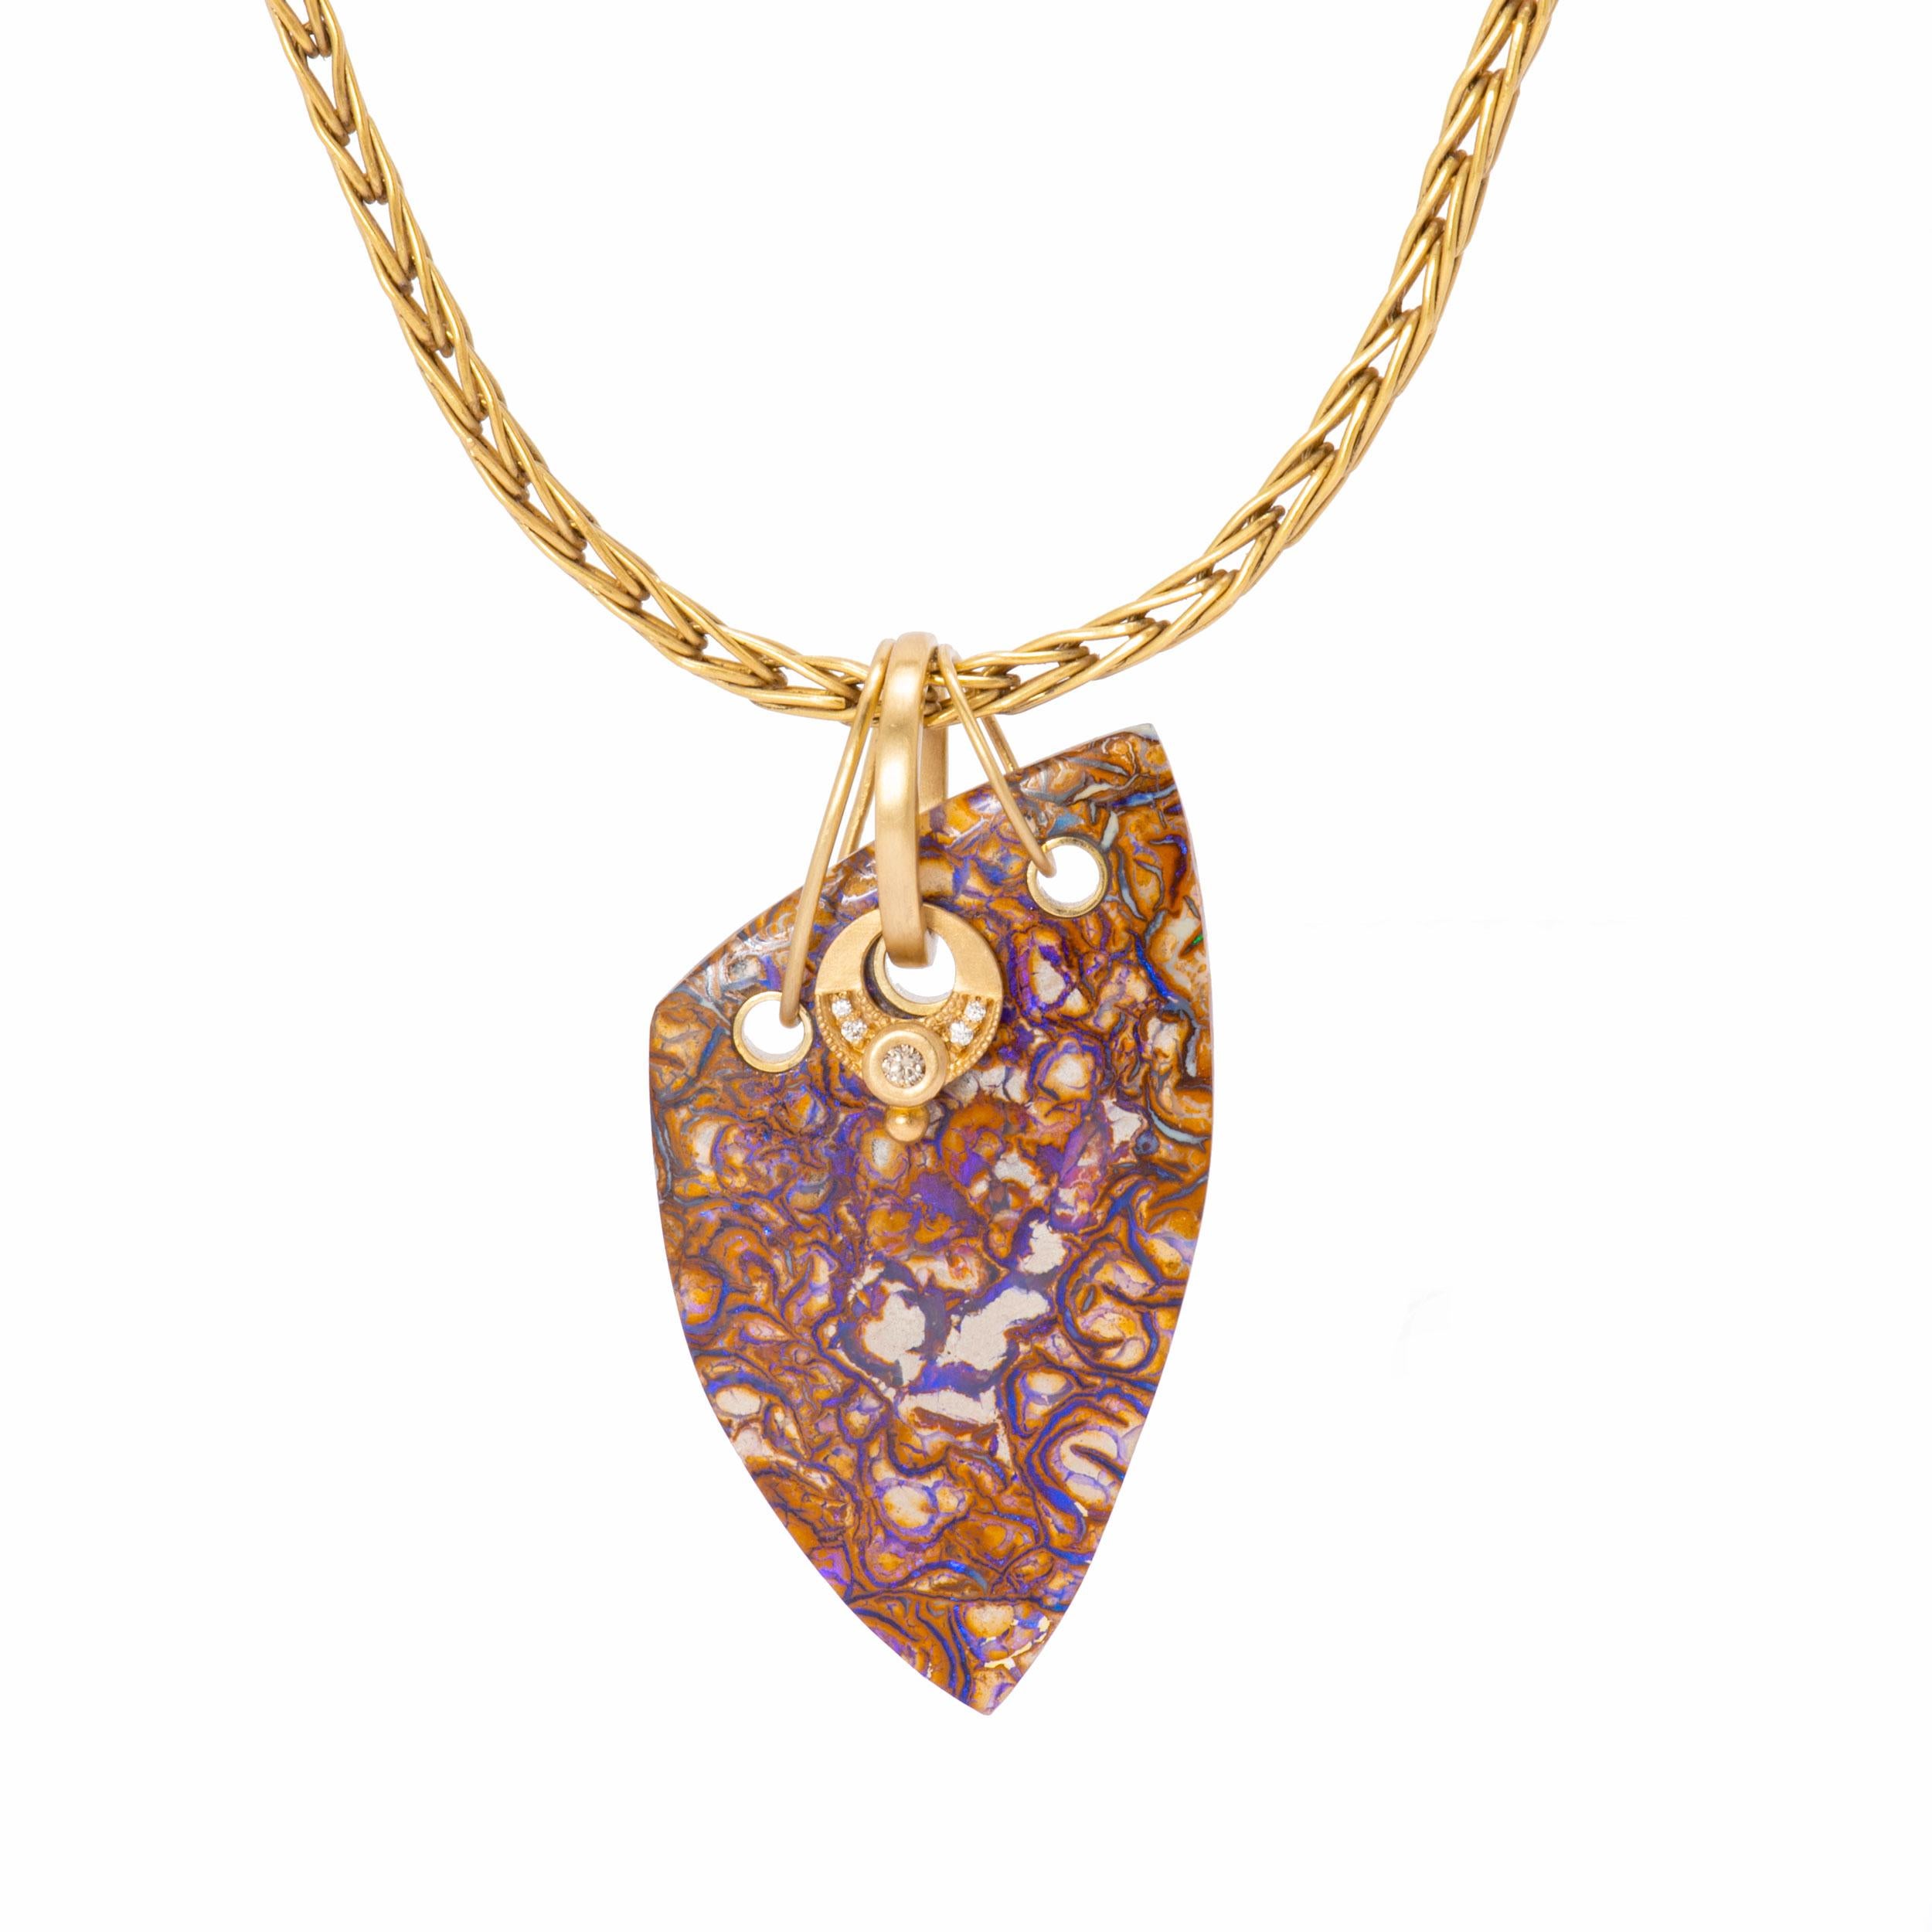 A rounded triangle slice of purple Boulder Opal sits behind a free hanging eclipse pendant of 18 karat gold set with white and cognac diamonds. A triad of 18 karat gold bails which are soldered as one add intrigue to a beautifully variegated slice